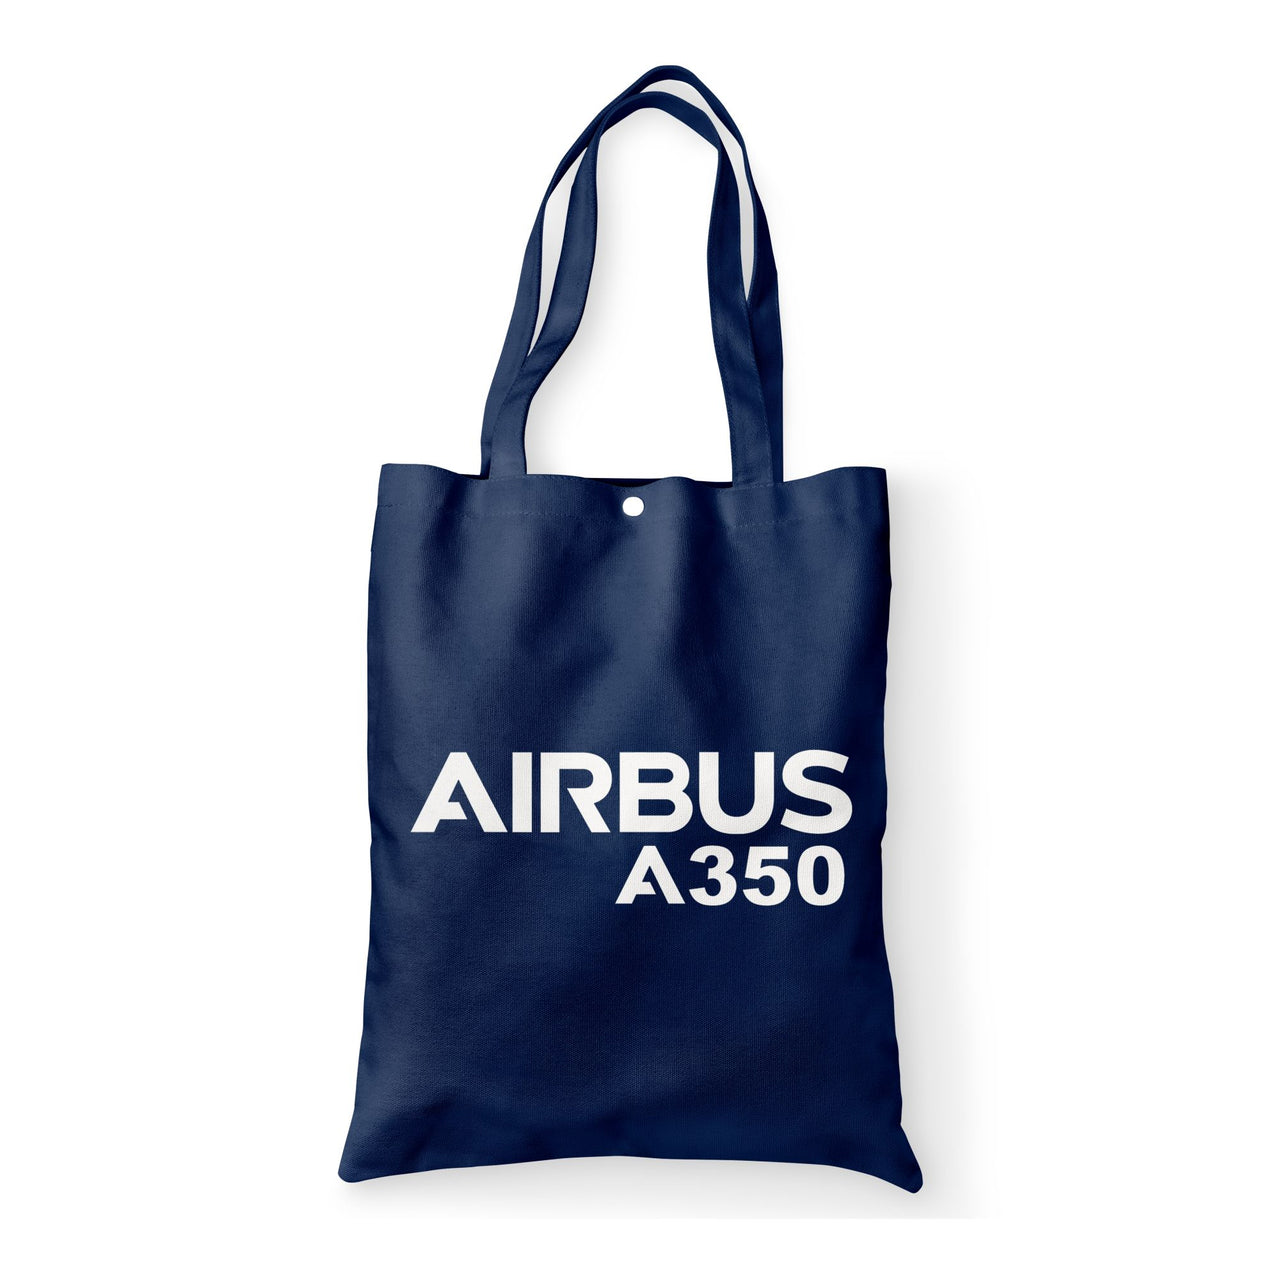 Airbus A350 & Text Designed Tote Bags